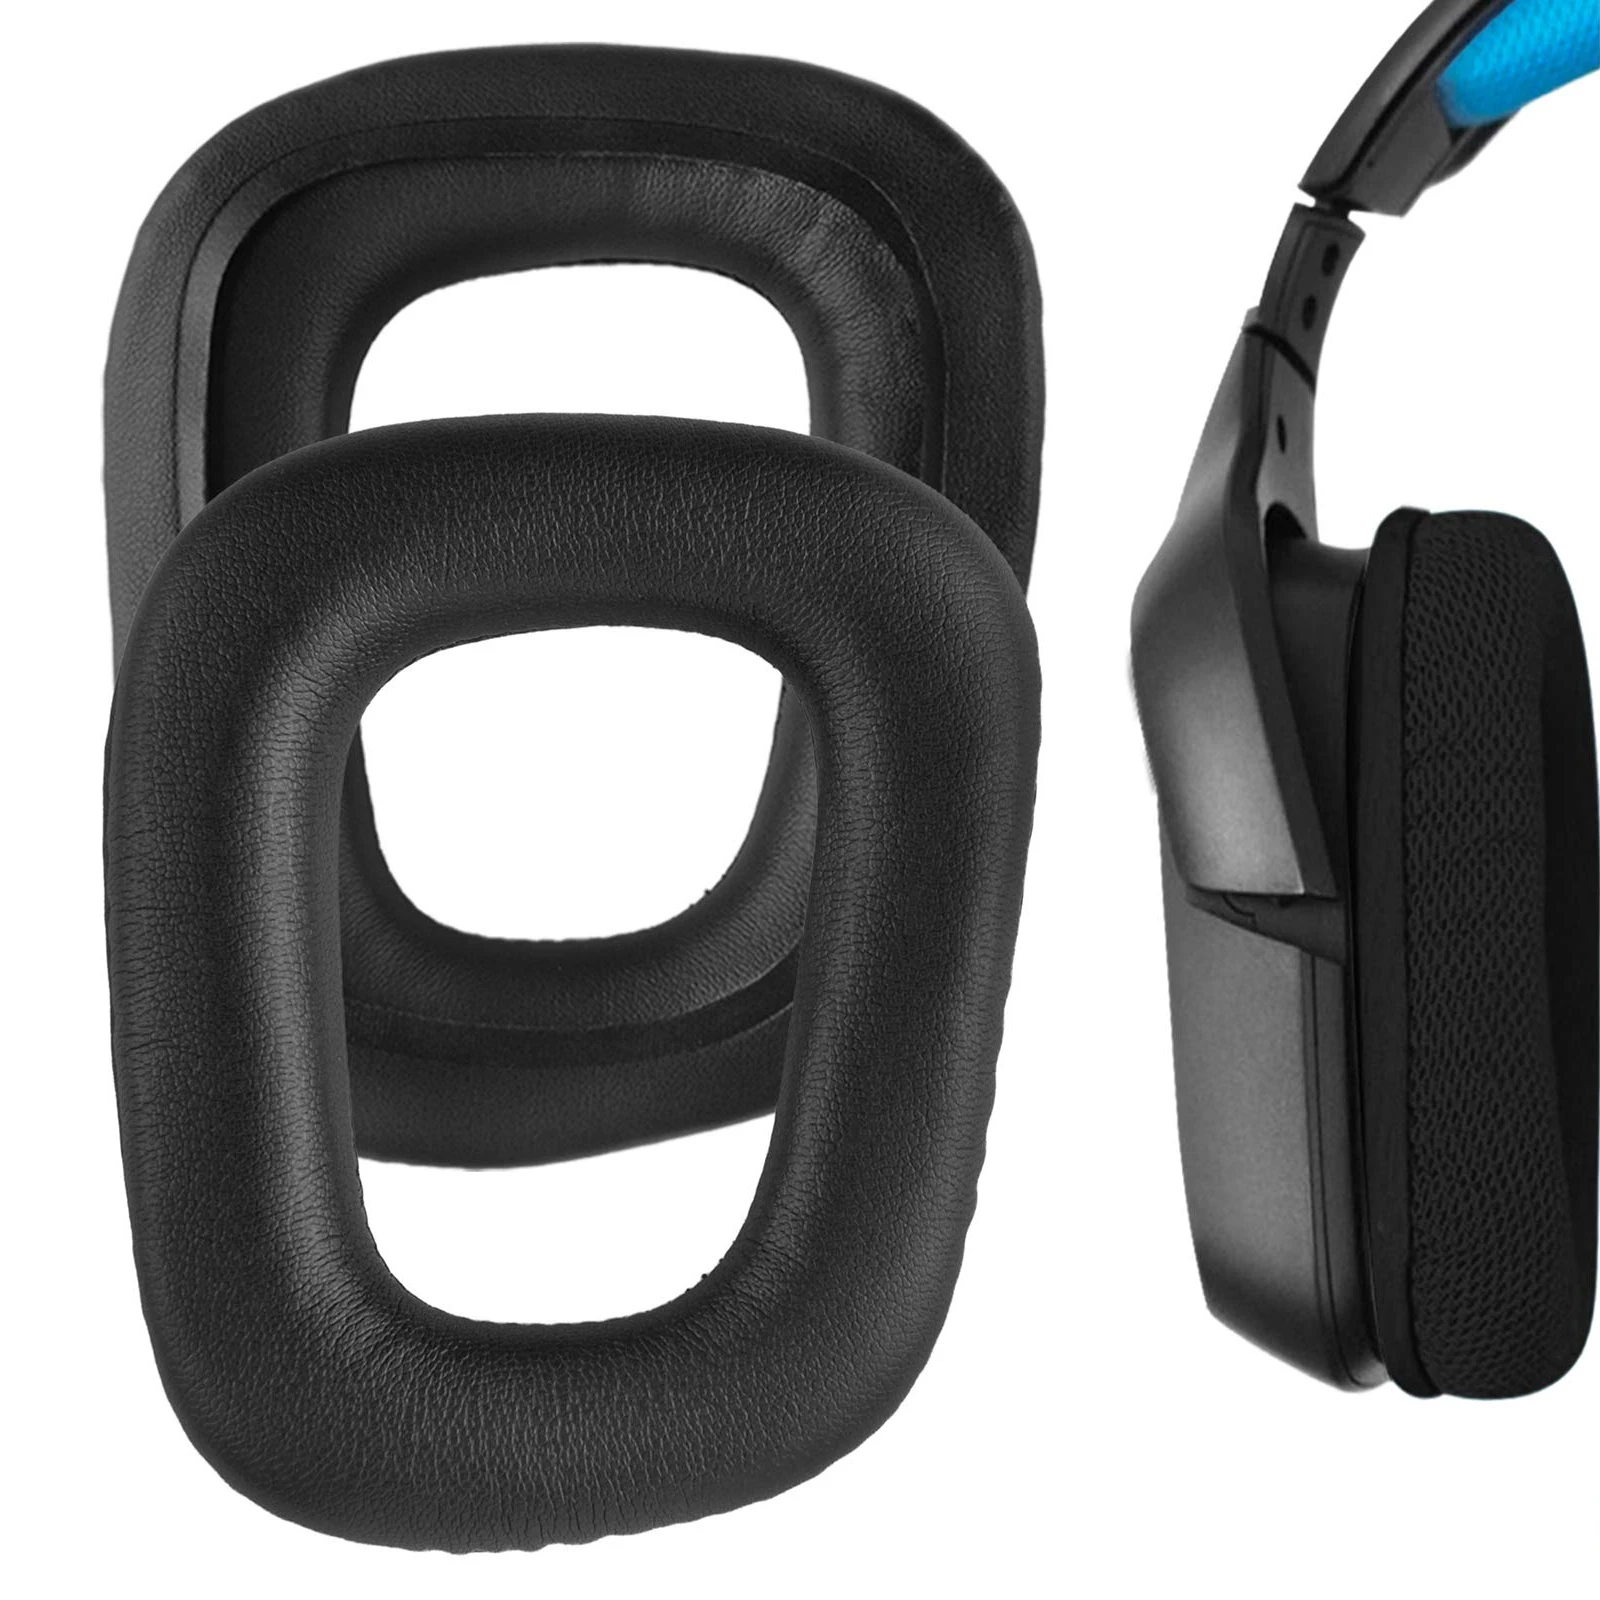 

Replacement Protein Leather Mesh Earpads Ear Cushion Pads For Logitech G930 G432 G431 G430 G332 G331 G231 G35 F450 Headsets